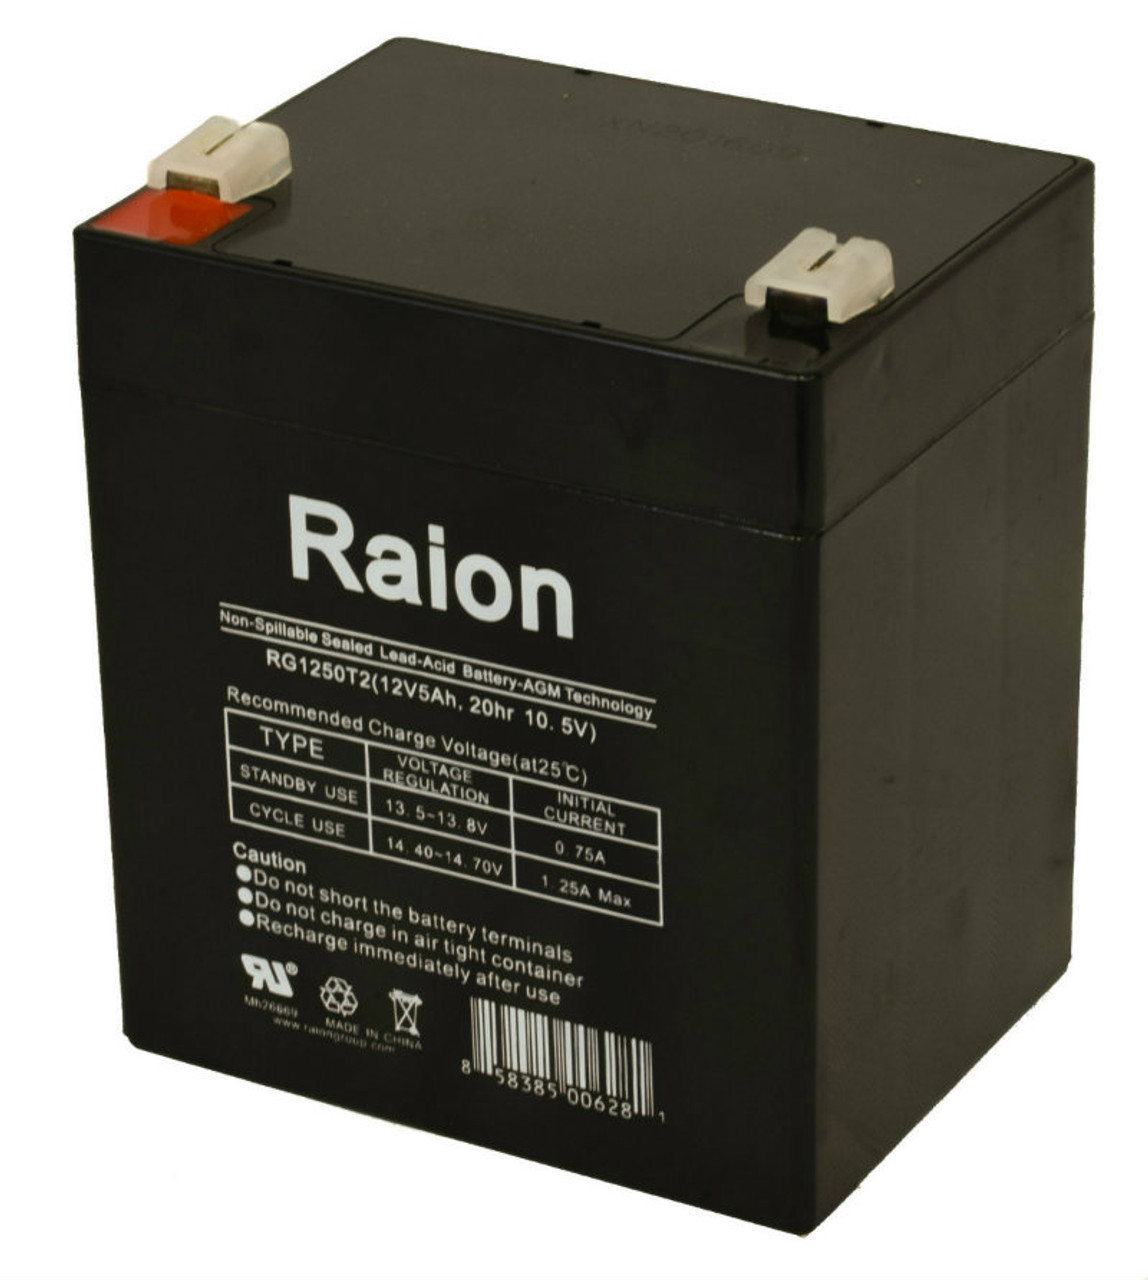 Raion Power RG1250T1 Replacement Battery for Chamberlain 4228 EverCharge Standby Power System